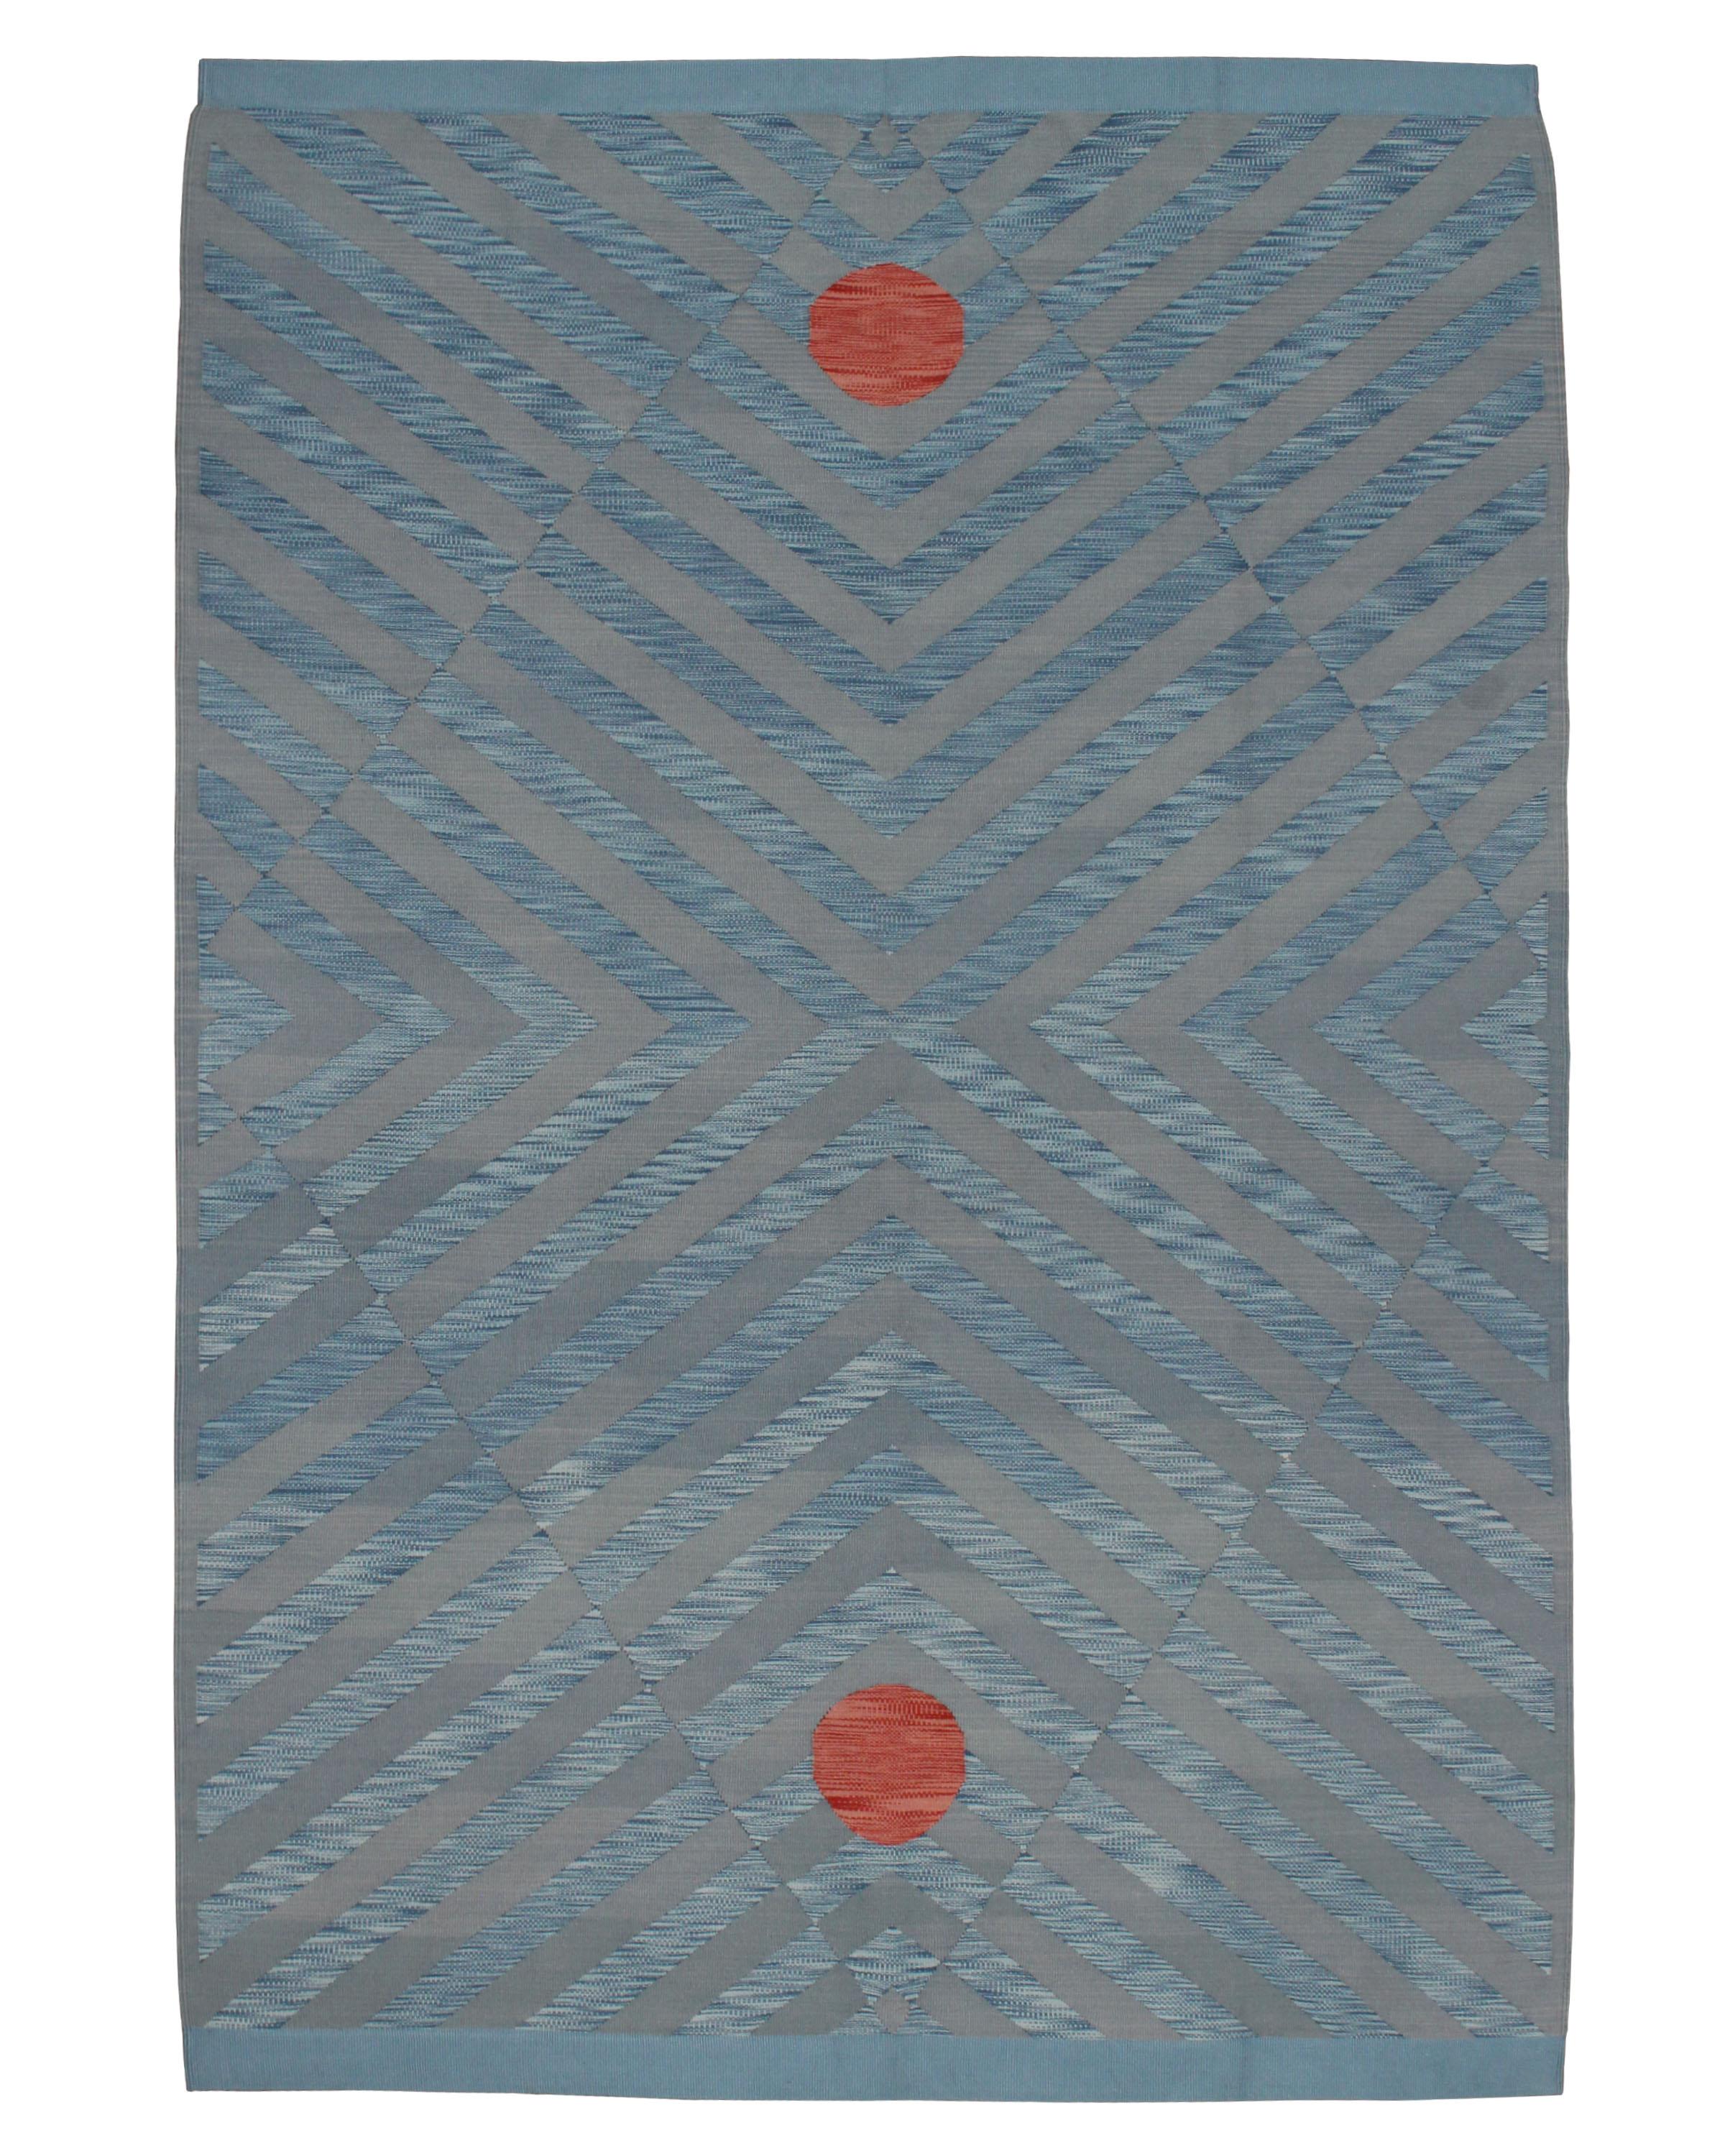 Norte 61 N01 Rug by Bi Yuu
Dimensions: D200 x 300 H cm
Material: 70% Lincoln Wool / 30% Wool-Cotton
Density: 2800 yam passes per m2.
Also Available in different dimensions. Dye: Natural.

She founded Bi Yuu with the vision that the work would